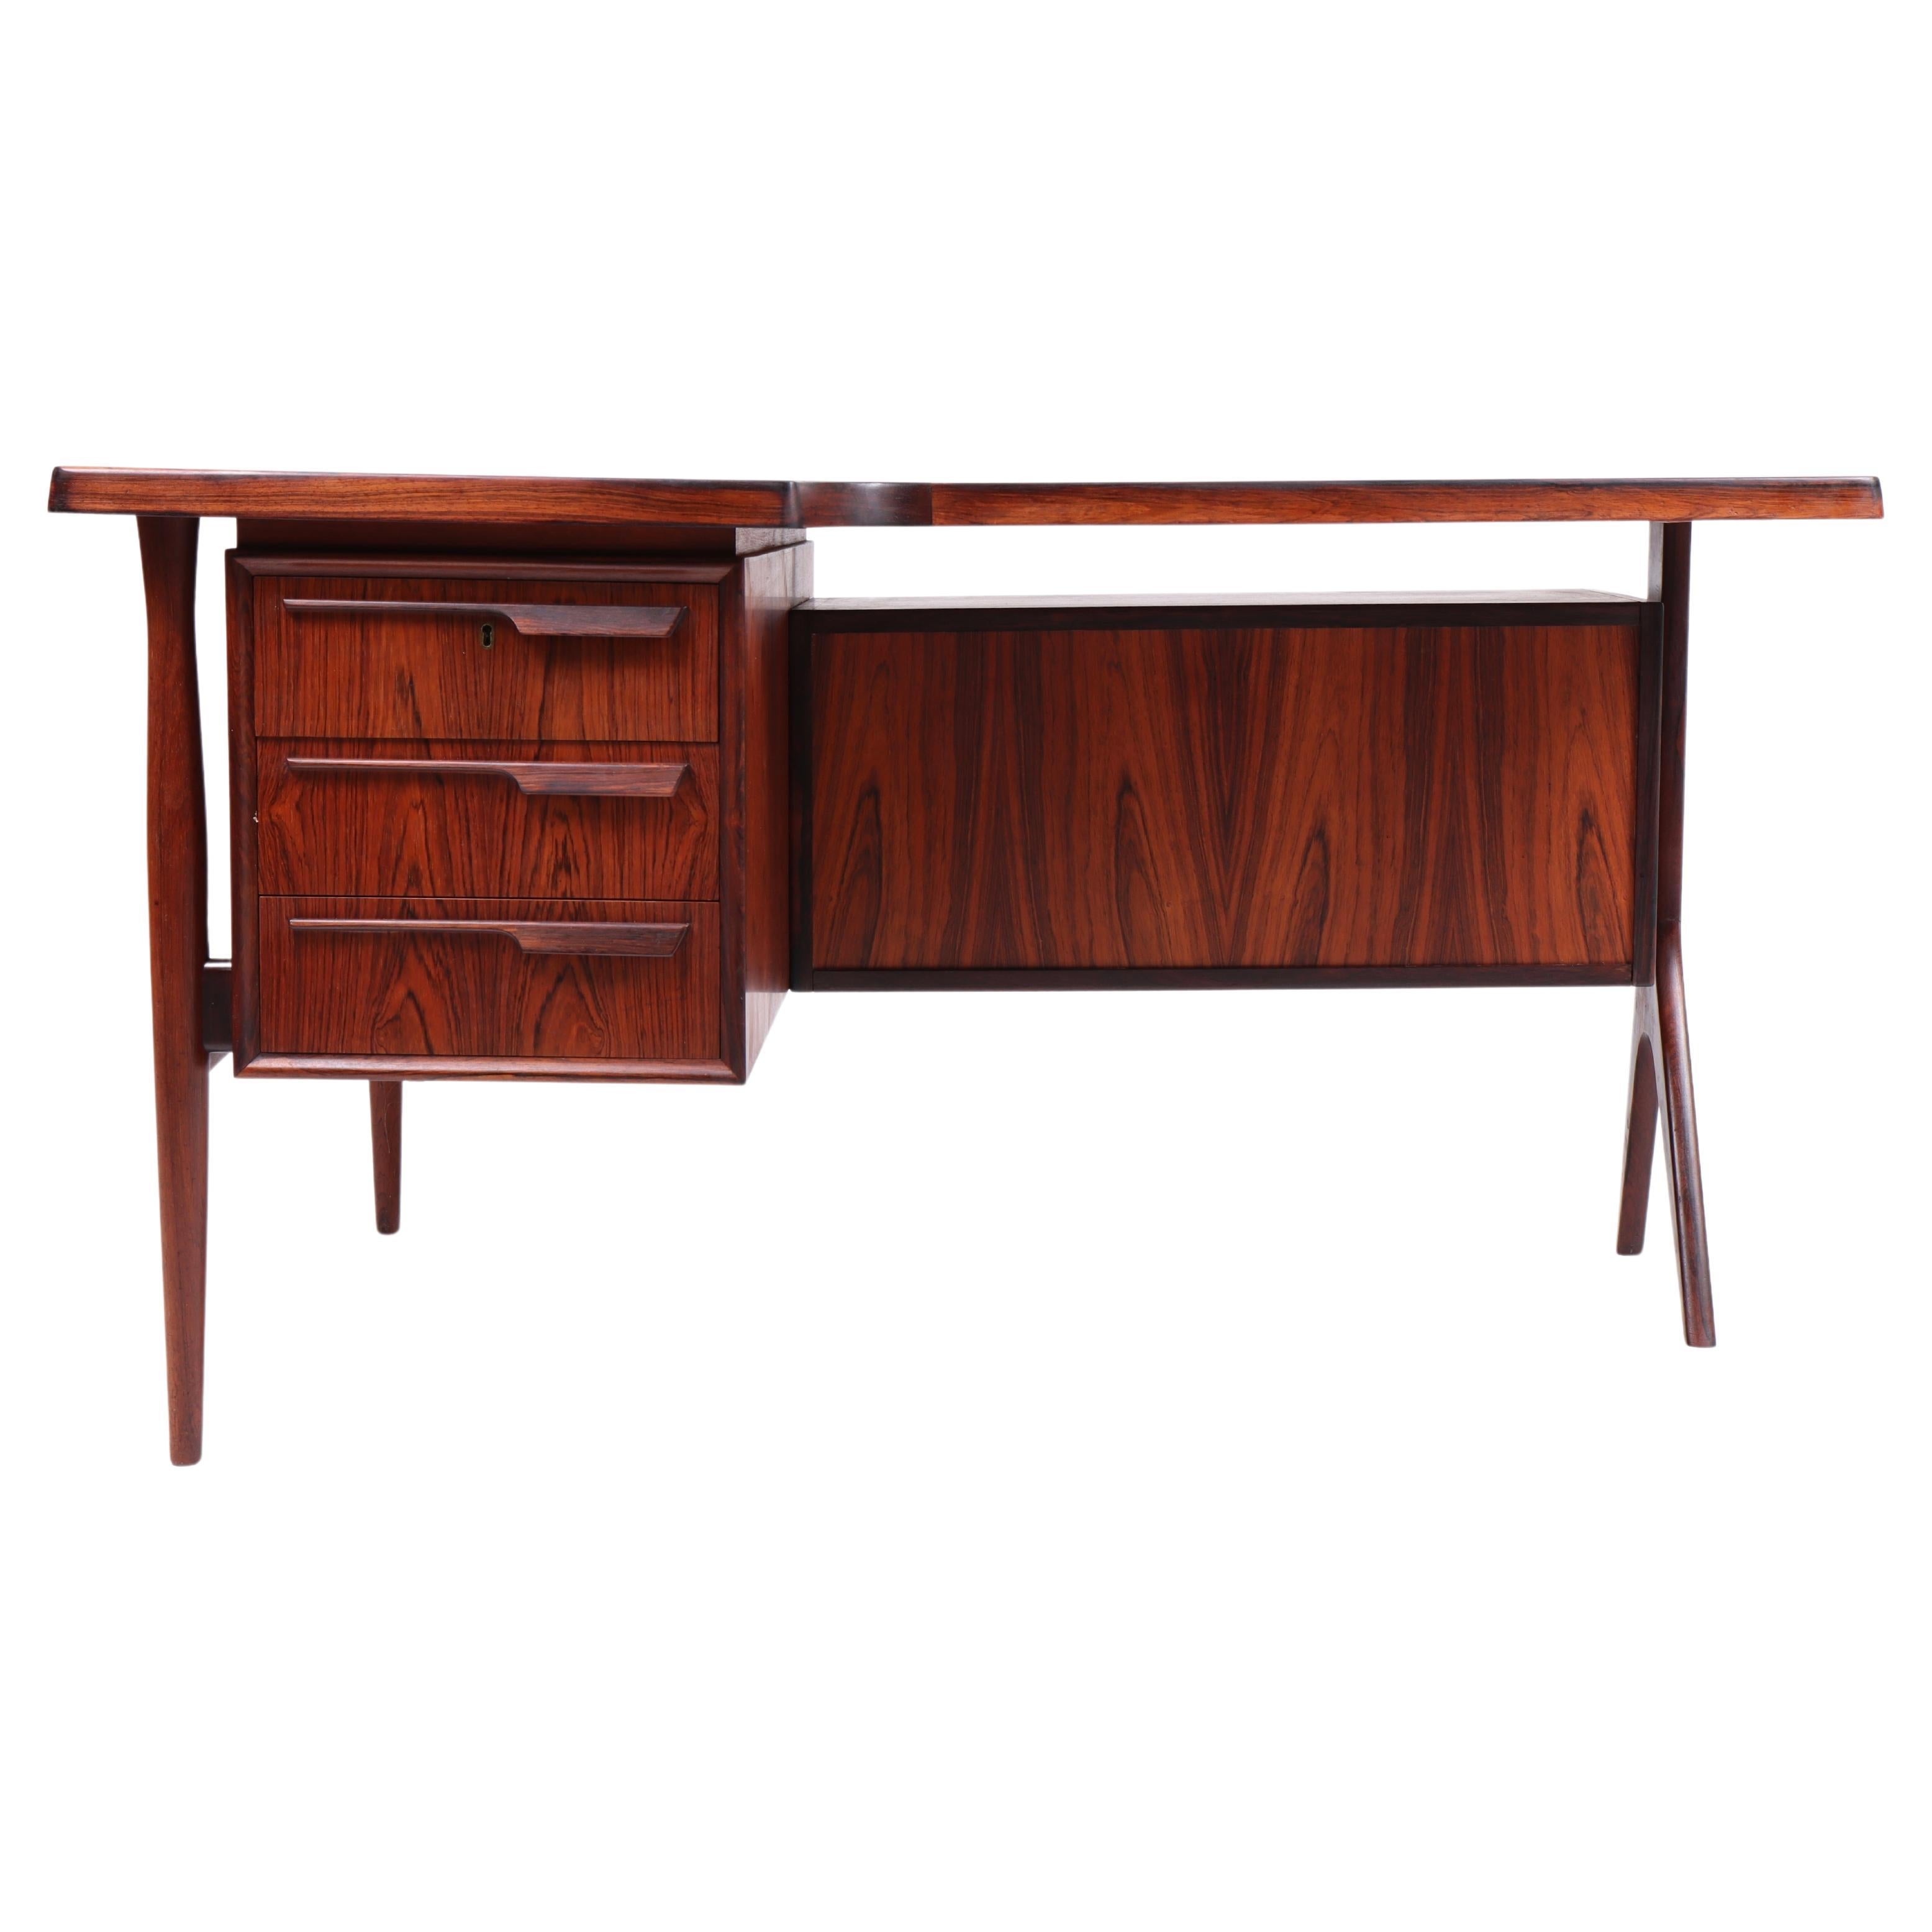 Midcentury Desk in Rosewood, Made in Denmark 1960s For Sale